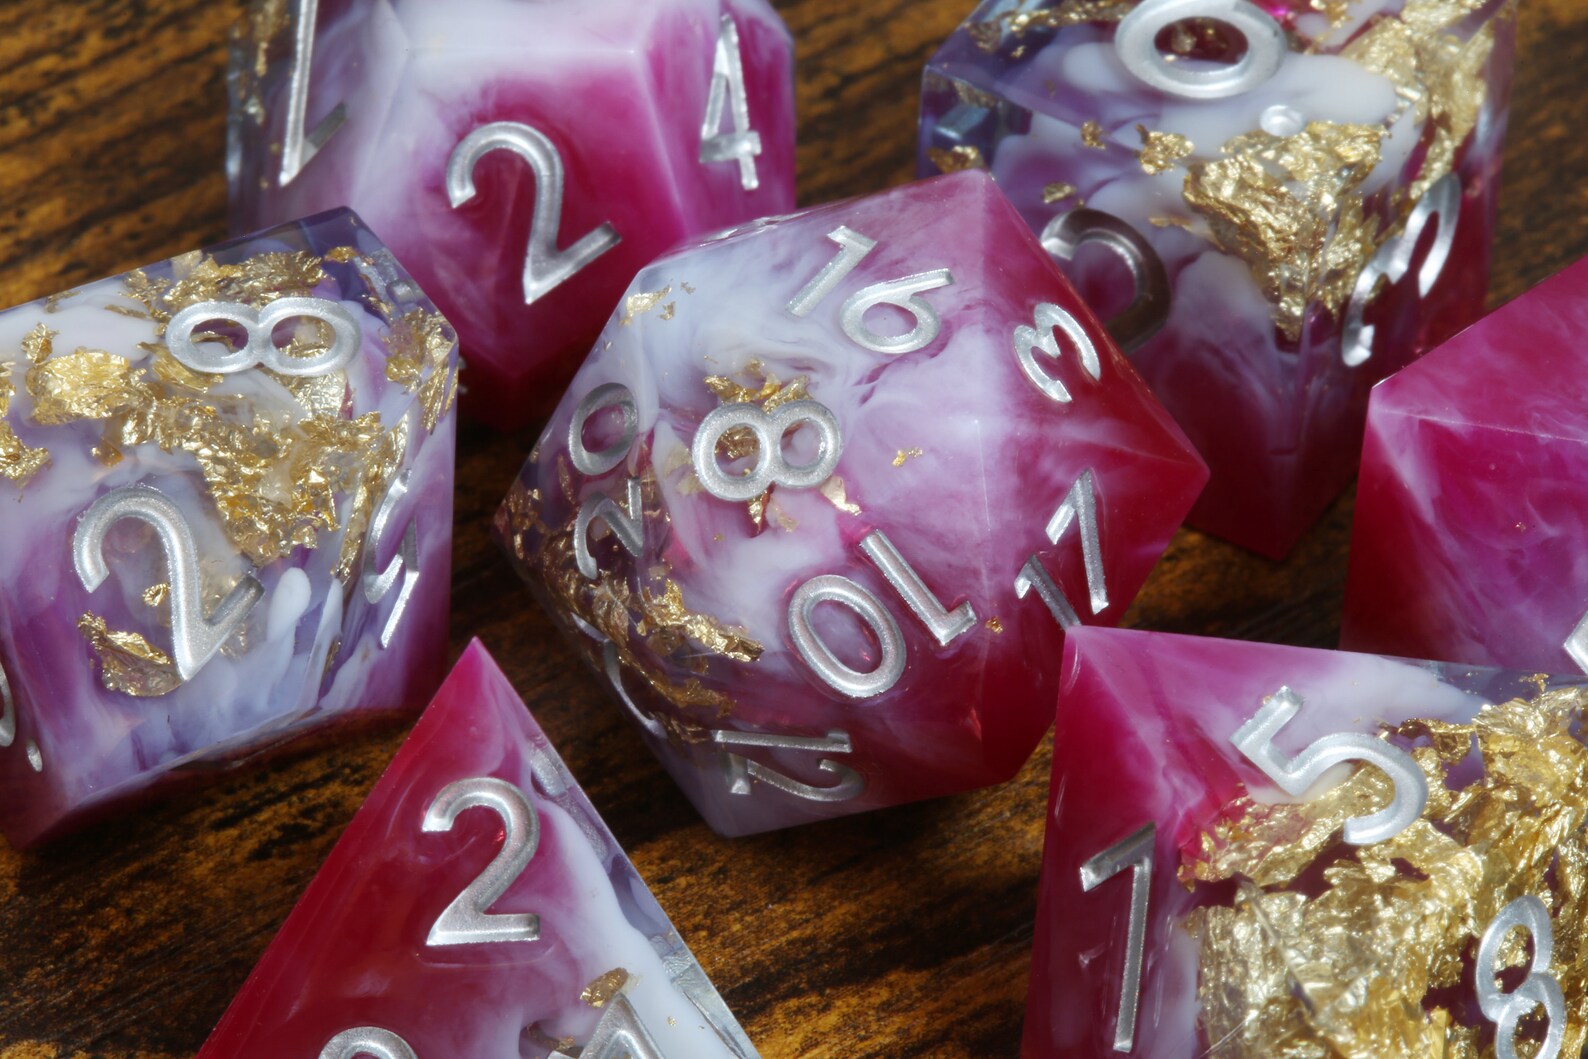 Crimson Splendor dice set - sharp edge dice set with red and white resin and gold flakes - The Wizard's Vault